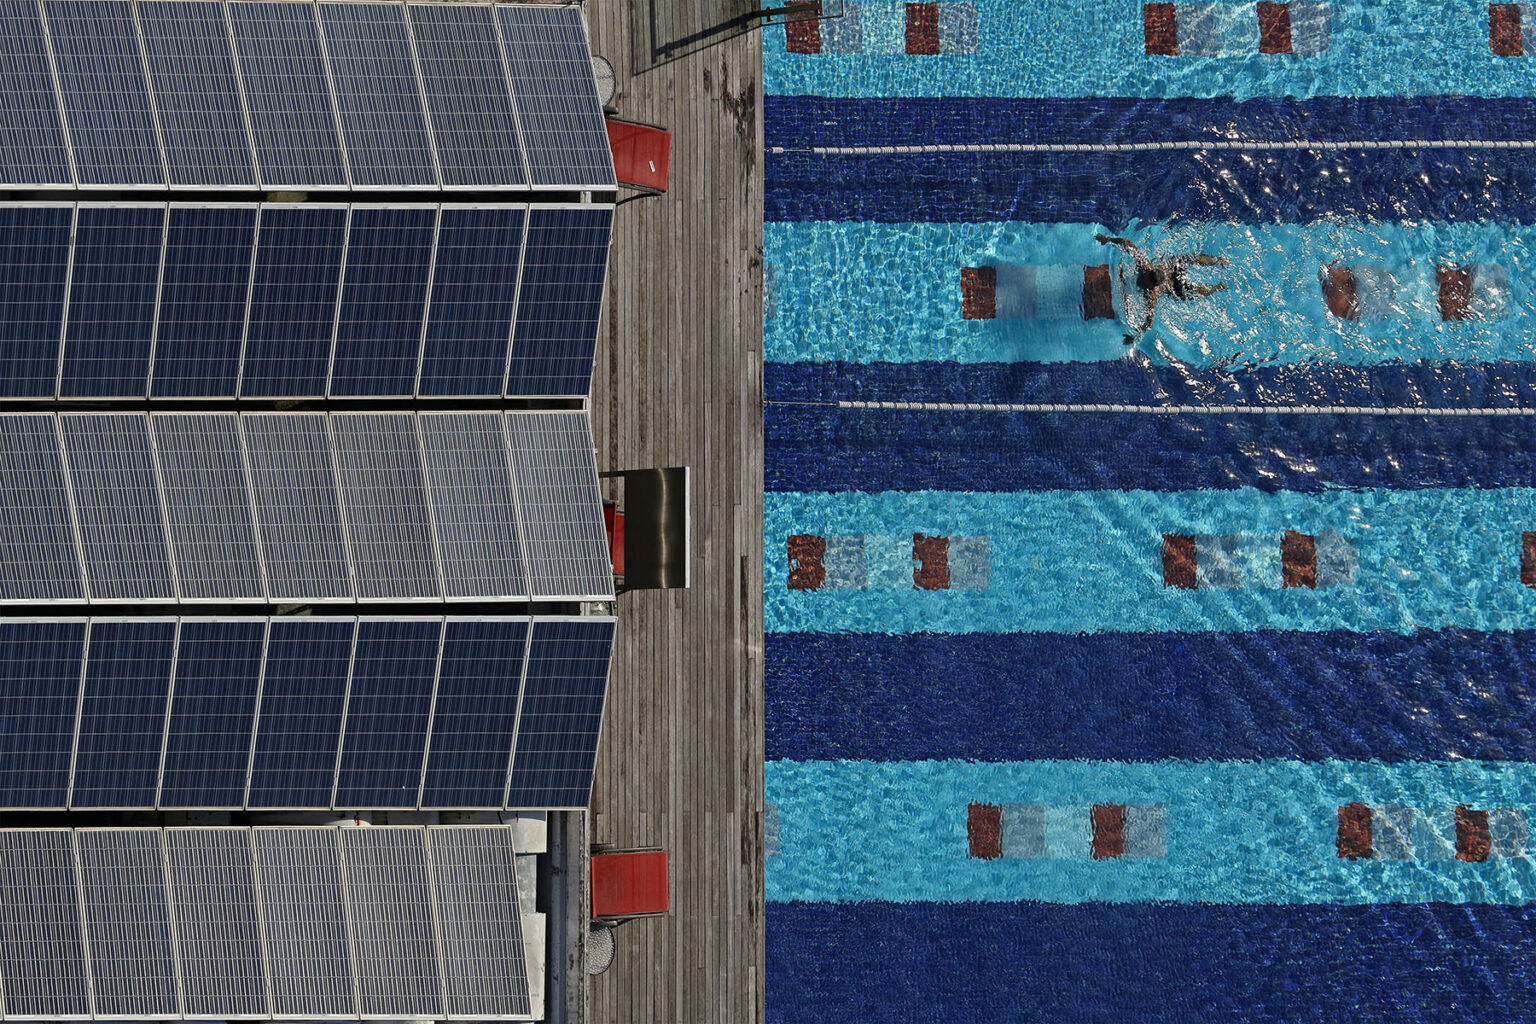 Swimming pool next to a building with solar panels on the roof